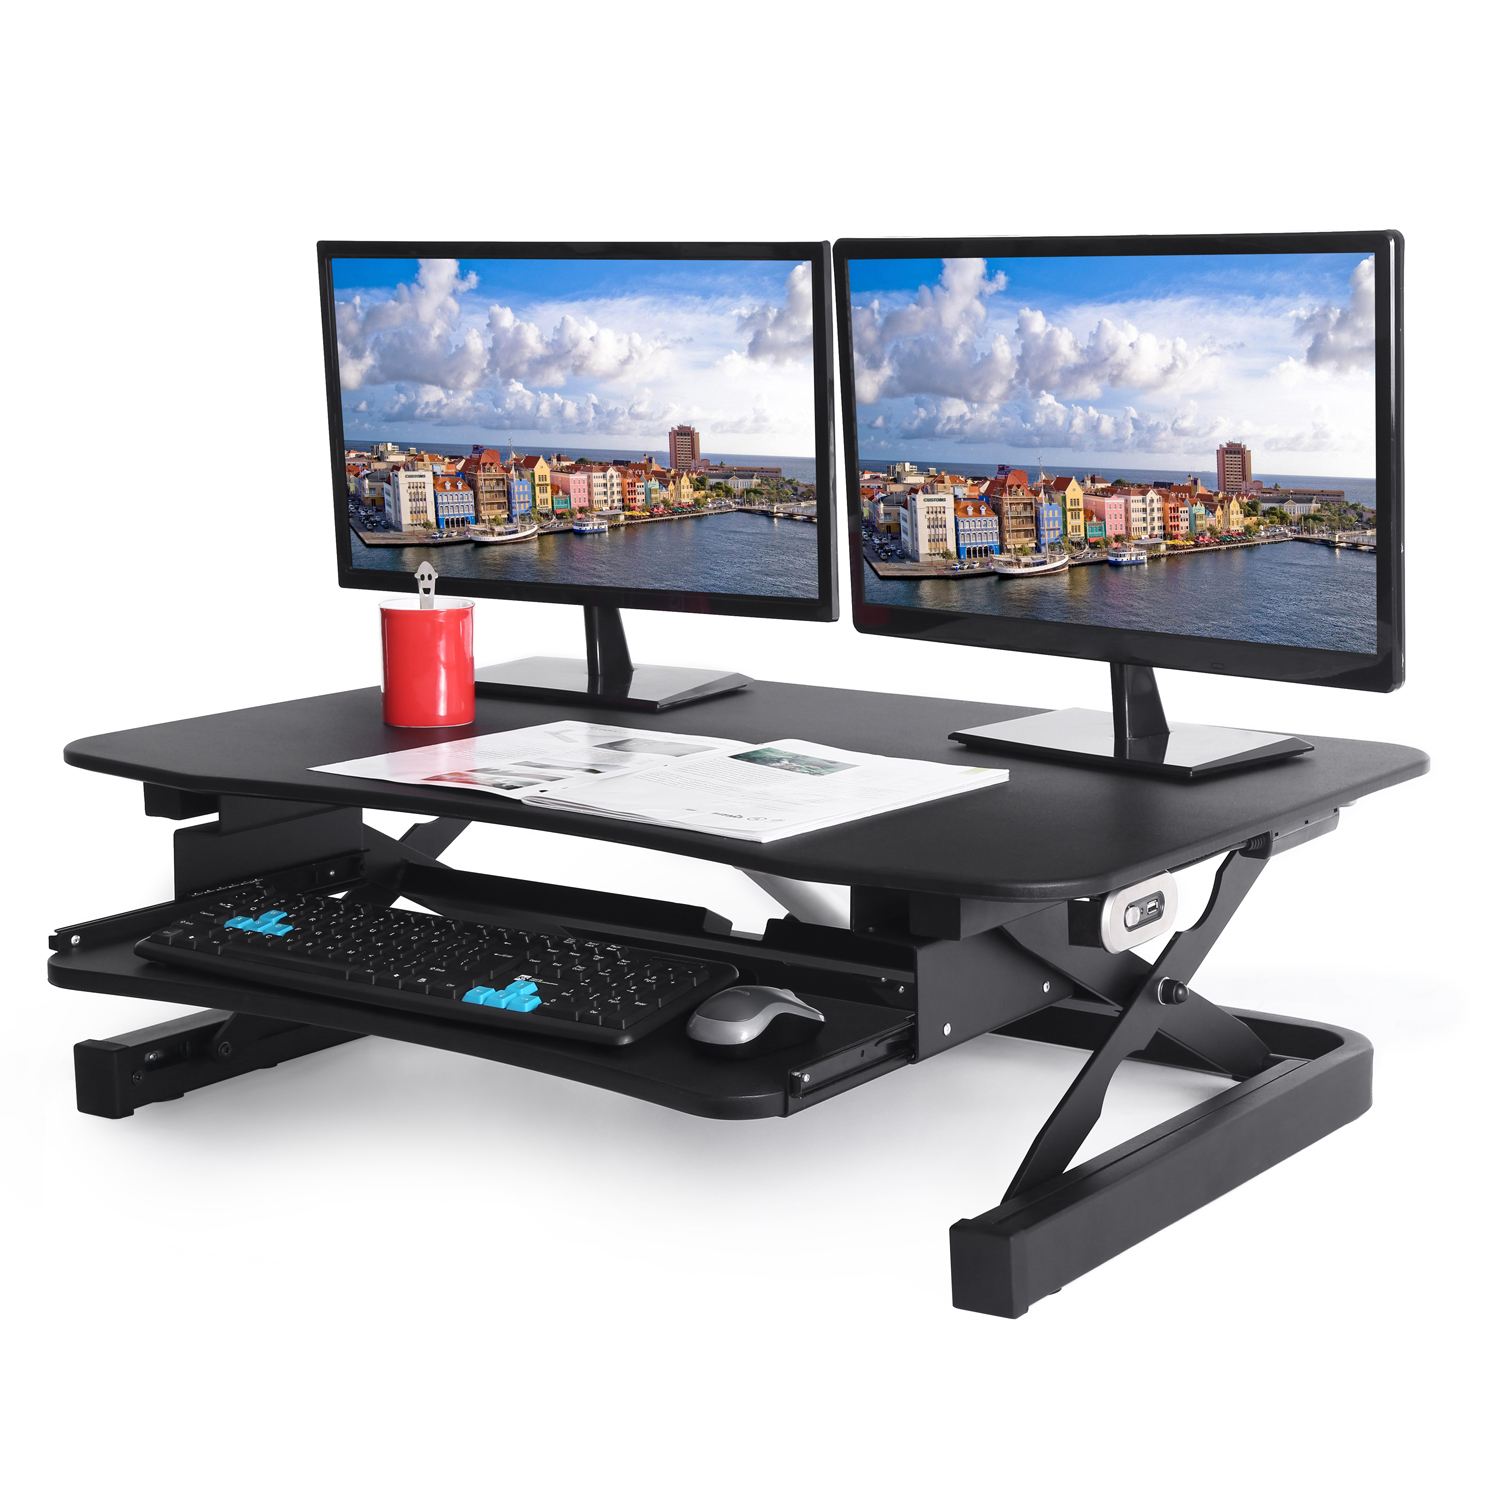 ApexDesk ZT Series Height Adjustable Sit to Stand Electric Desk Converter, 2-Tier Design with Large 36x24" Upper Work Surface and Lower Keyboard Tray Deck (Black) - image 1 of 8